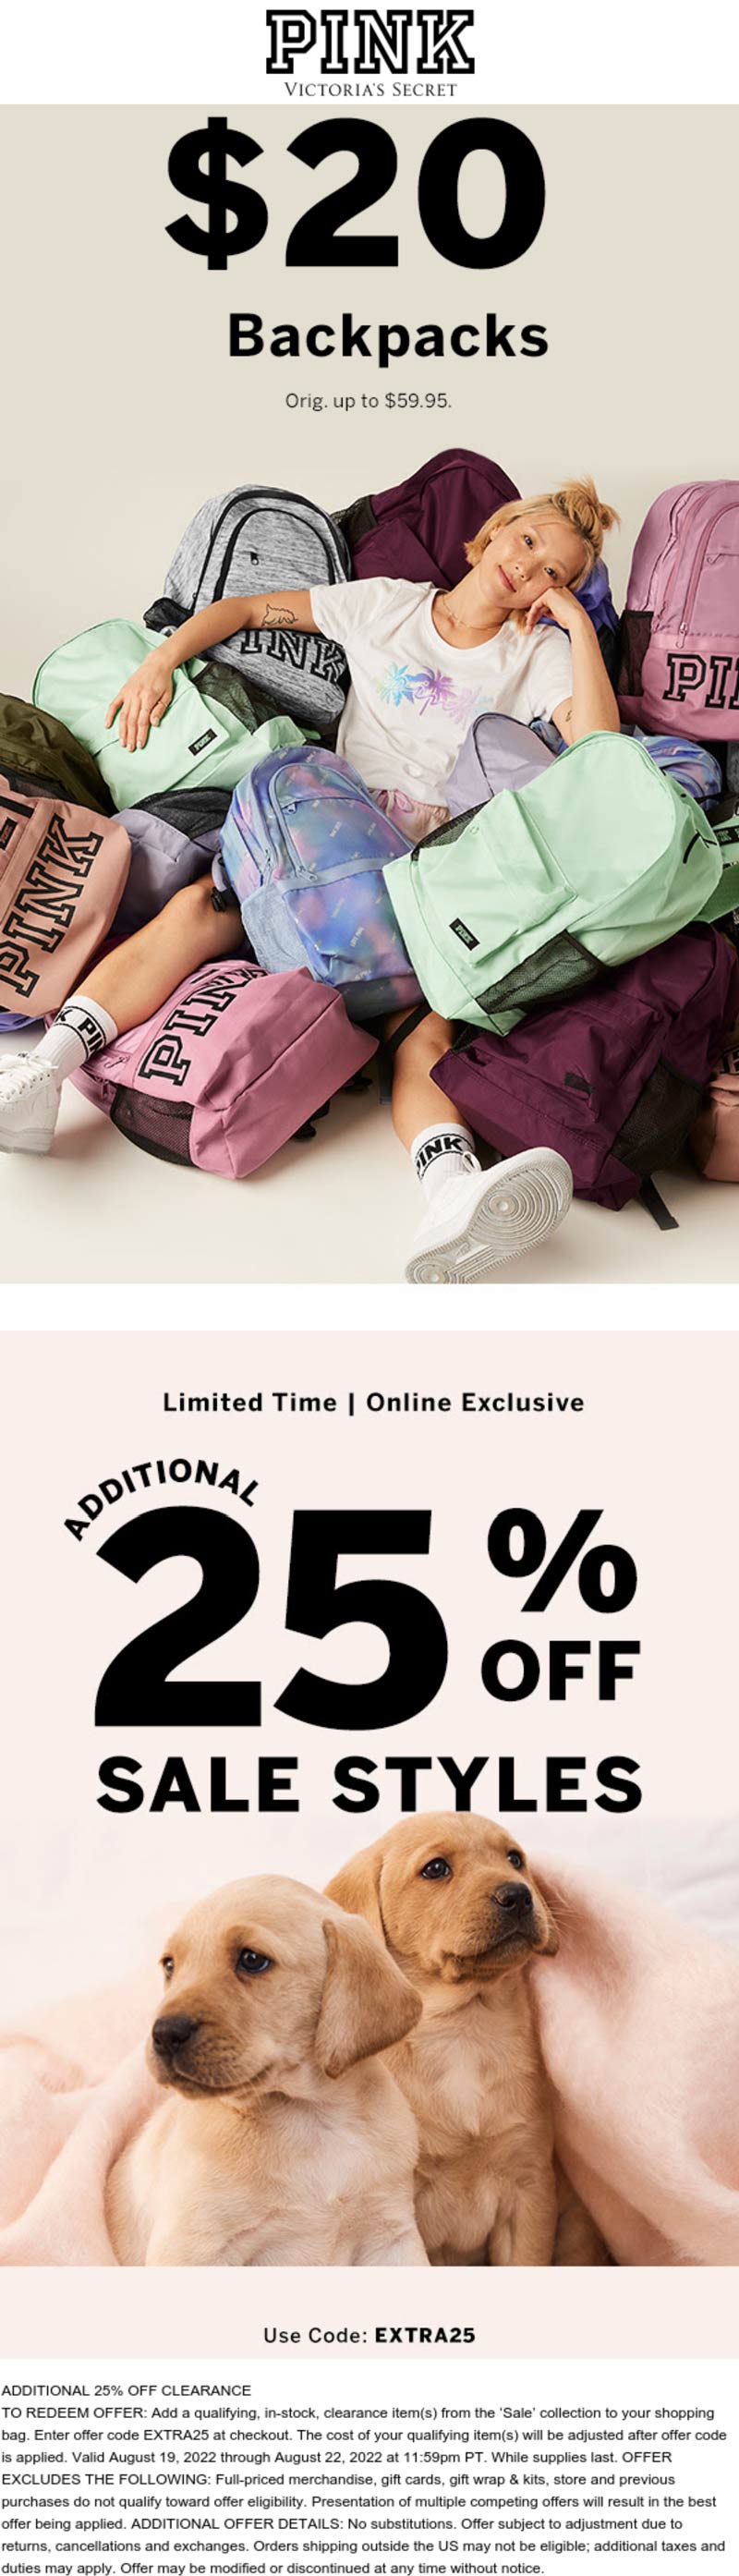 PINK stores Coupon  $20 backpacks + extra 25% off sale items at PINK via promo code EXTRA25 #pink 